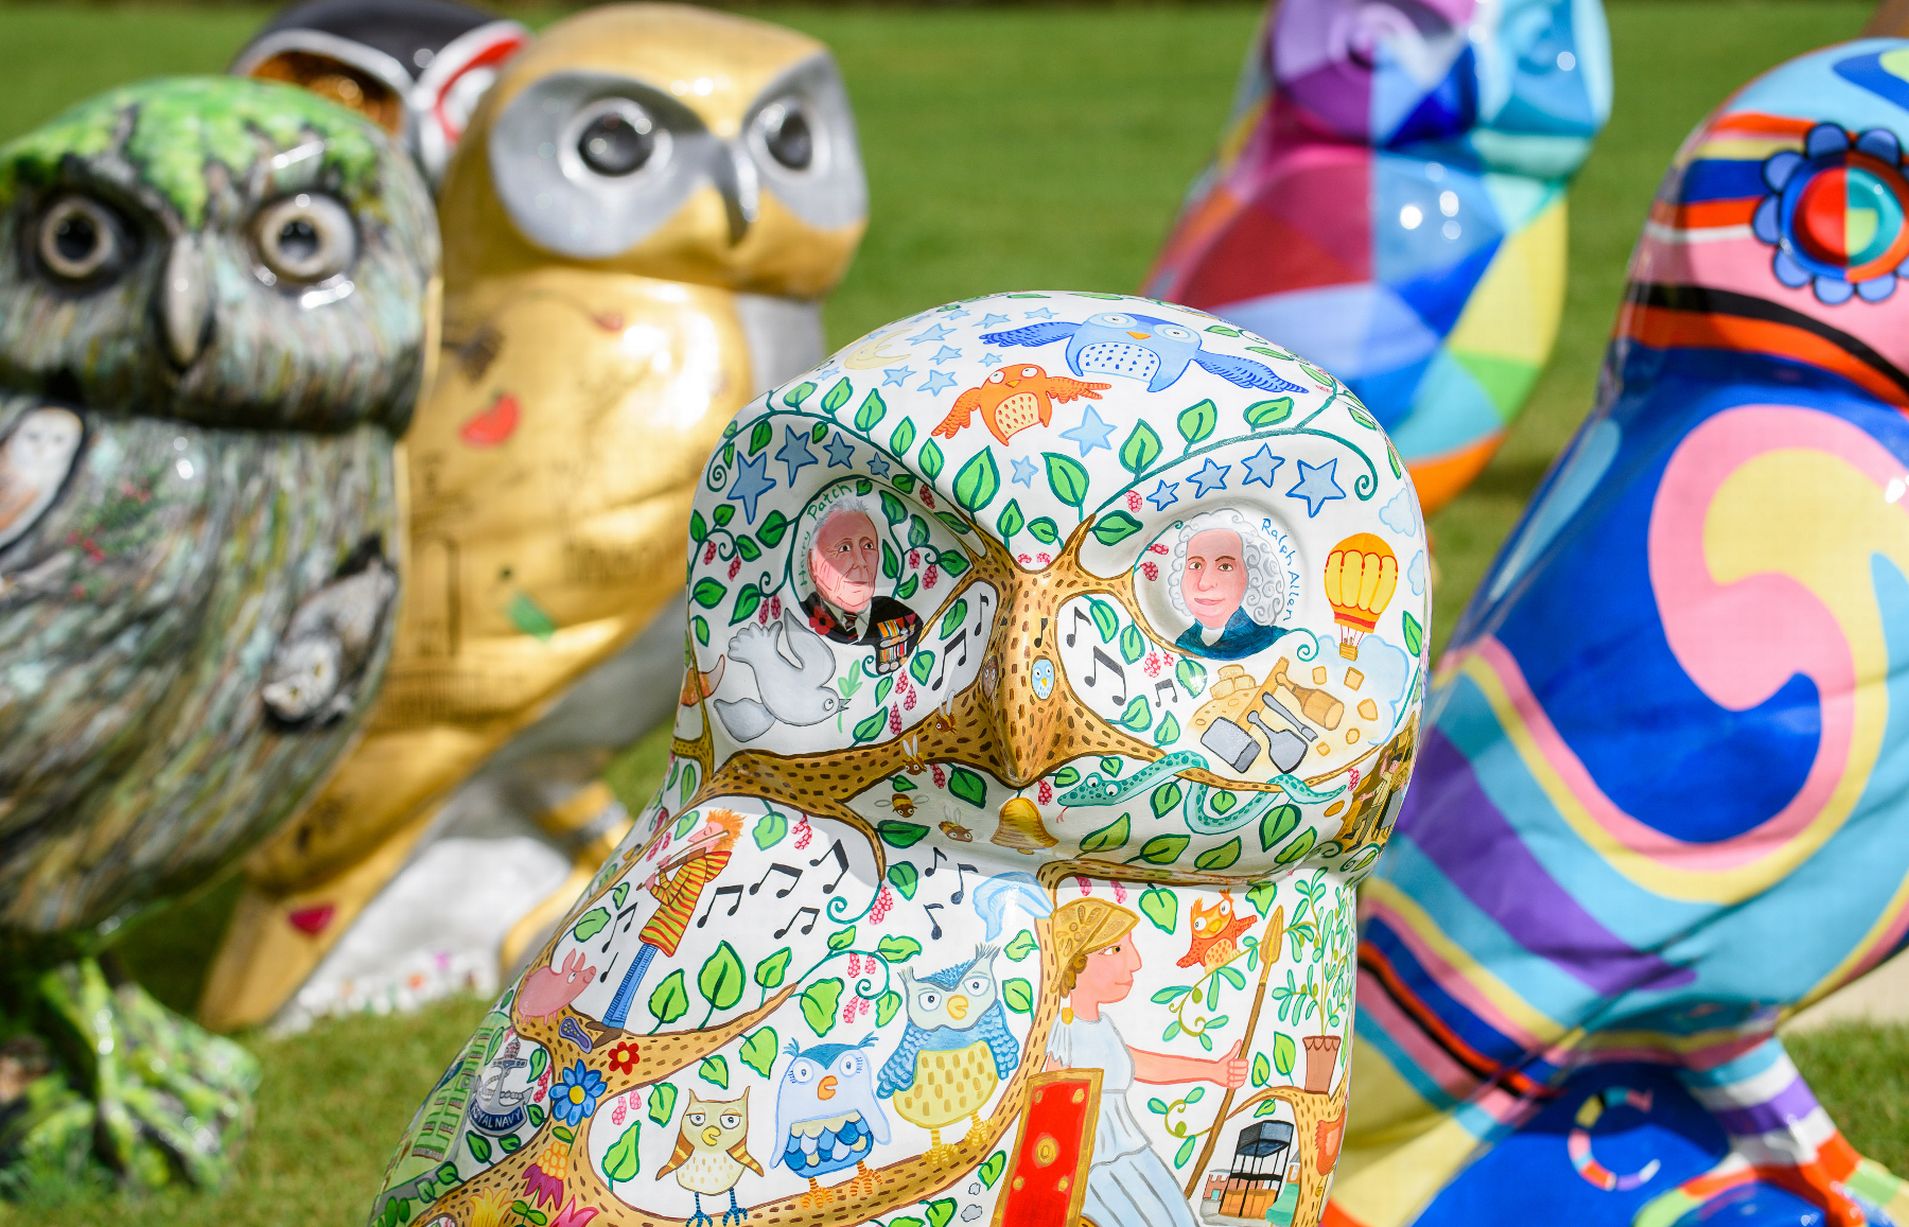 It’s a hoot at Mulberry Park this summer